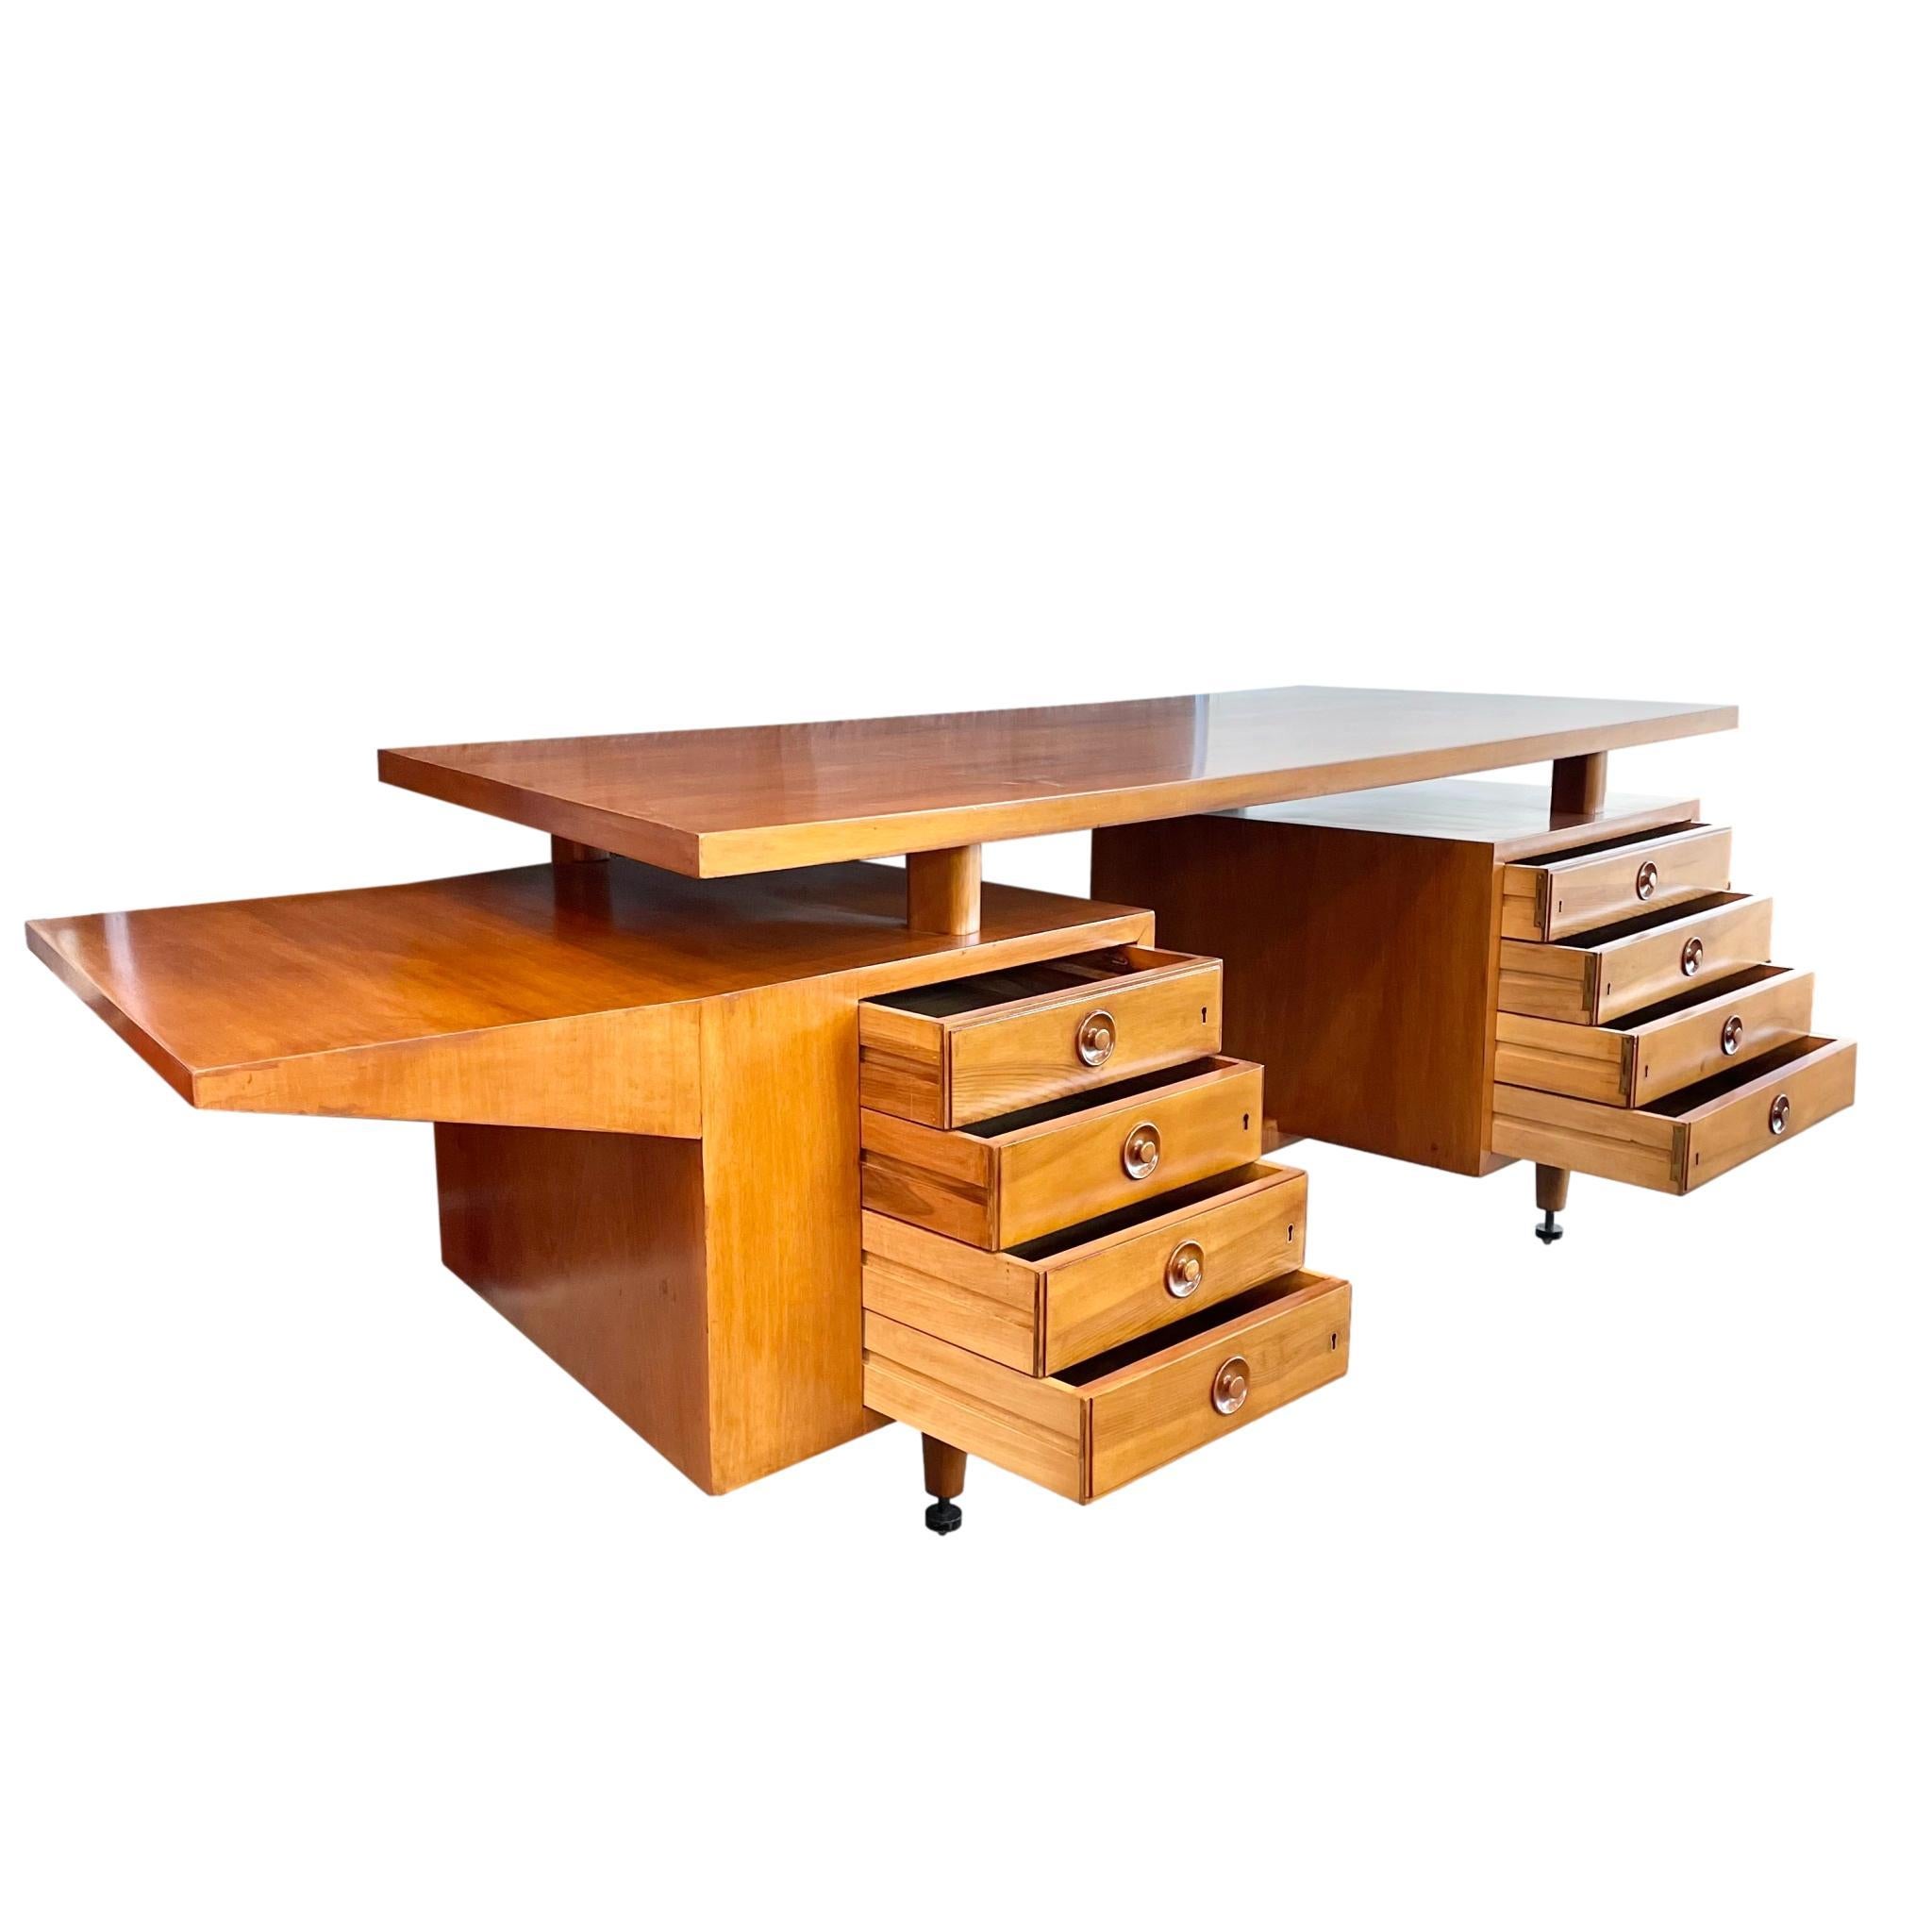 Stunning Italian desk in a beautiful caramel wood. Four pull-out drawers flank each side of the desk. Angular extension on the left side of the desk for extra writing space and fantastic design. Desktop is elevated 3-4 inches above the frame sitting